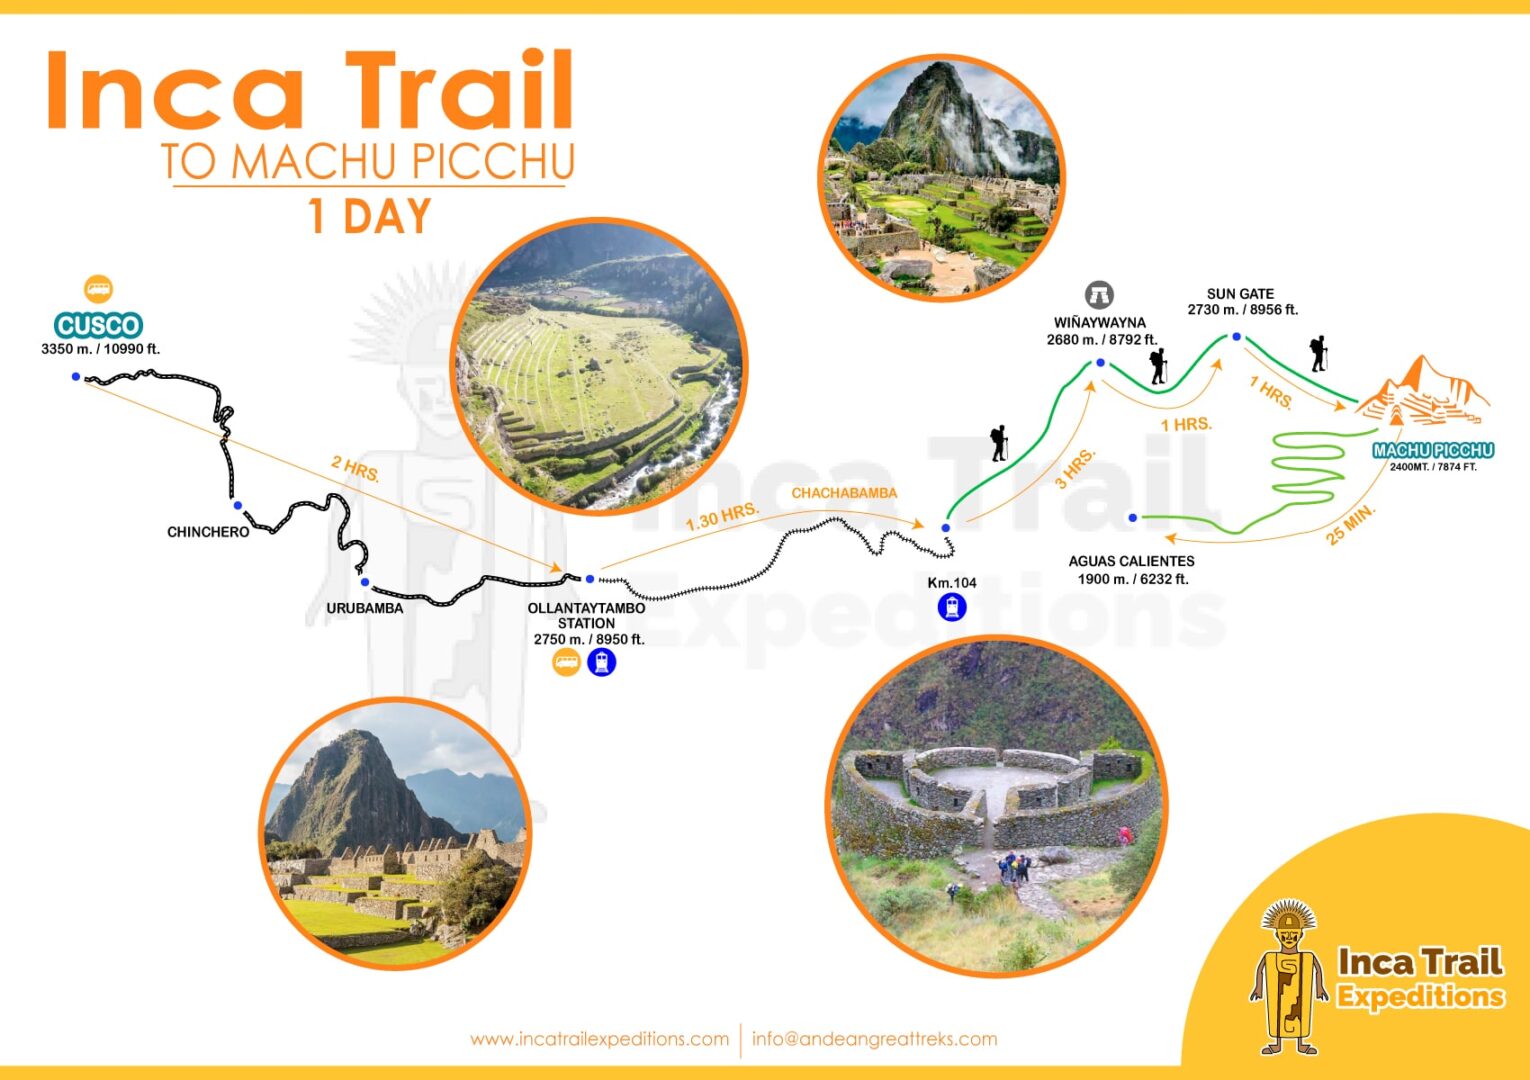 INCA-TRAIL-TO-MACHU-PICCHU-1-DAY-BY-INCA-TRAIL-EXPEDITIONS